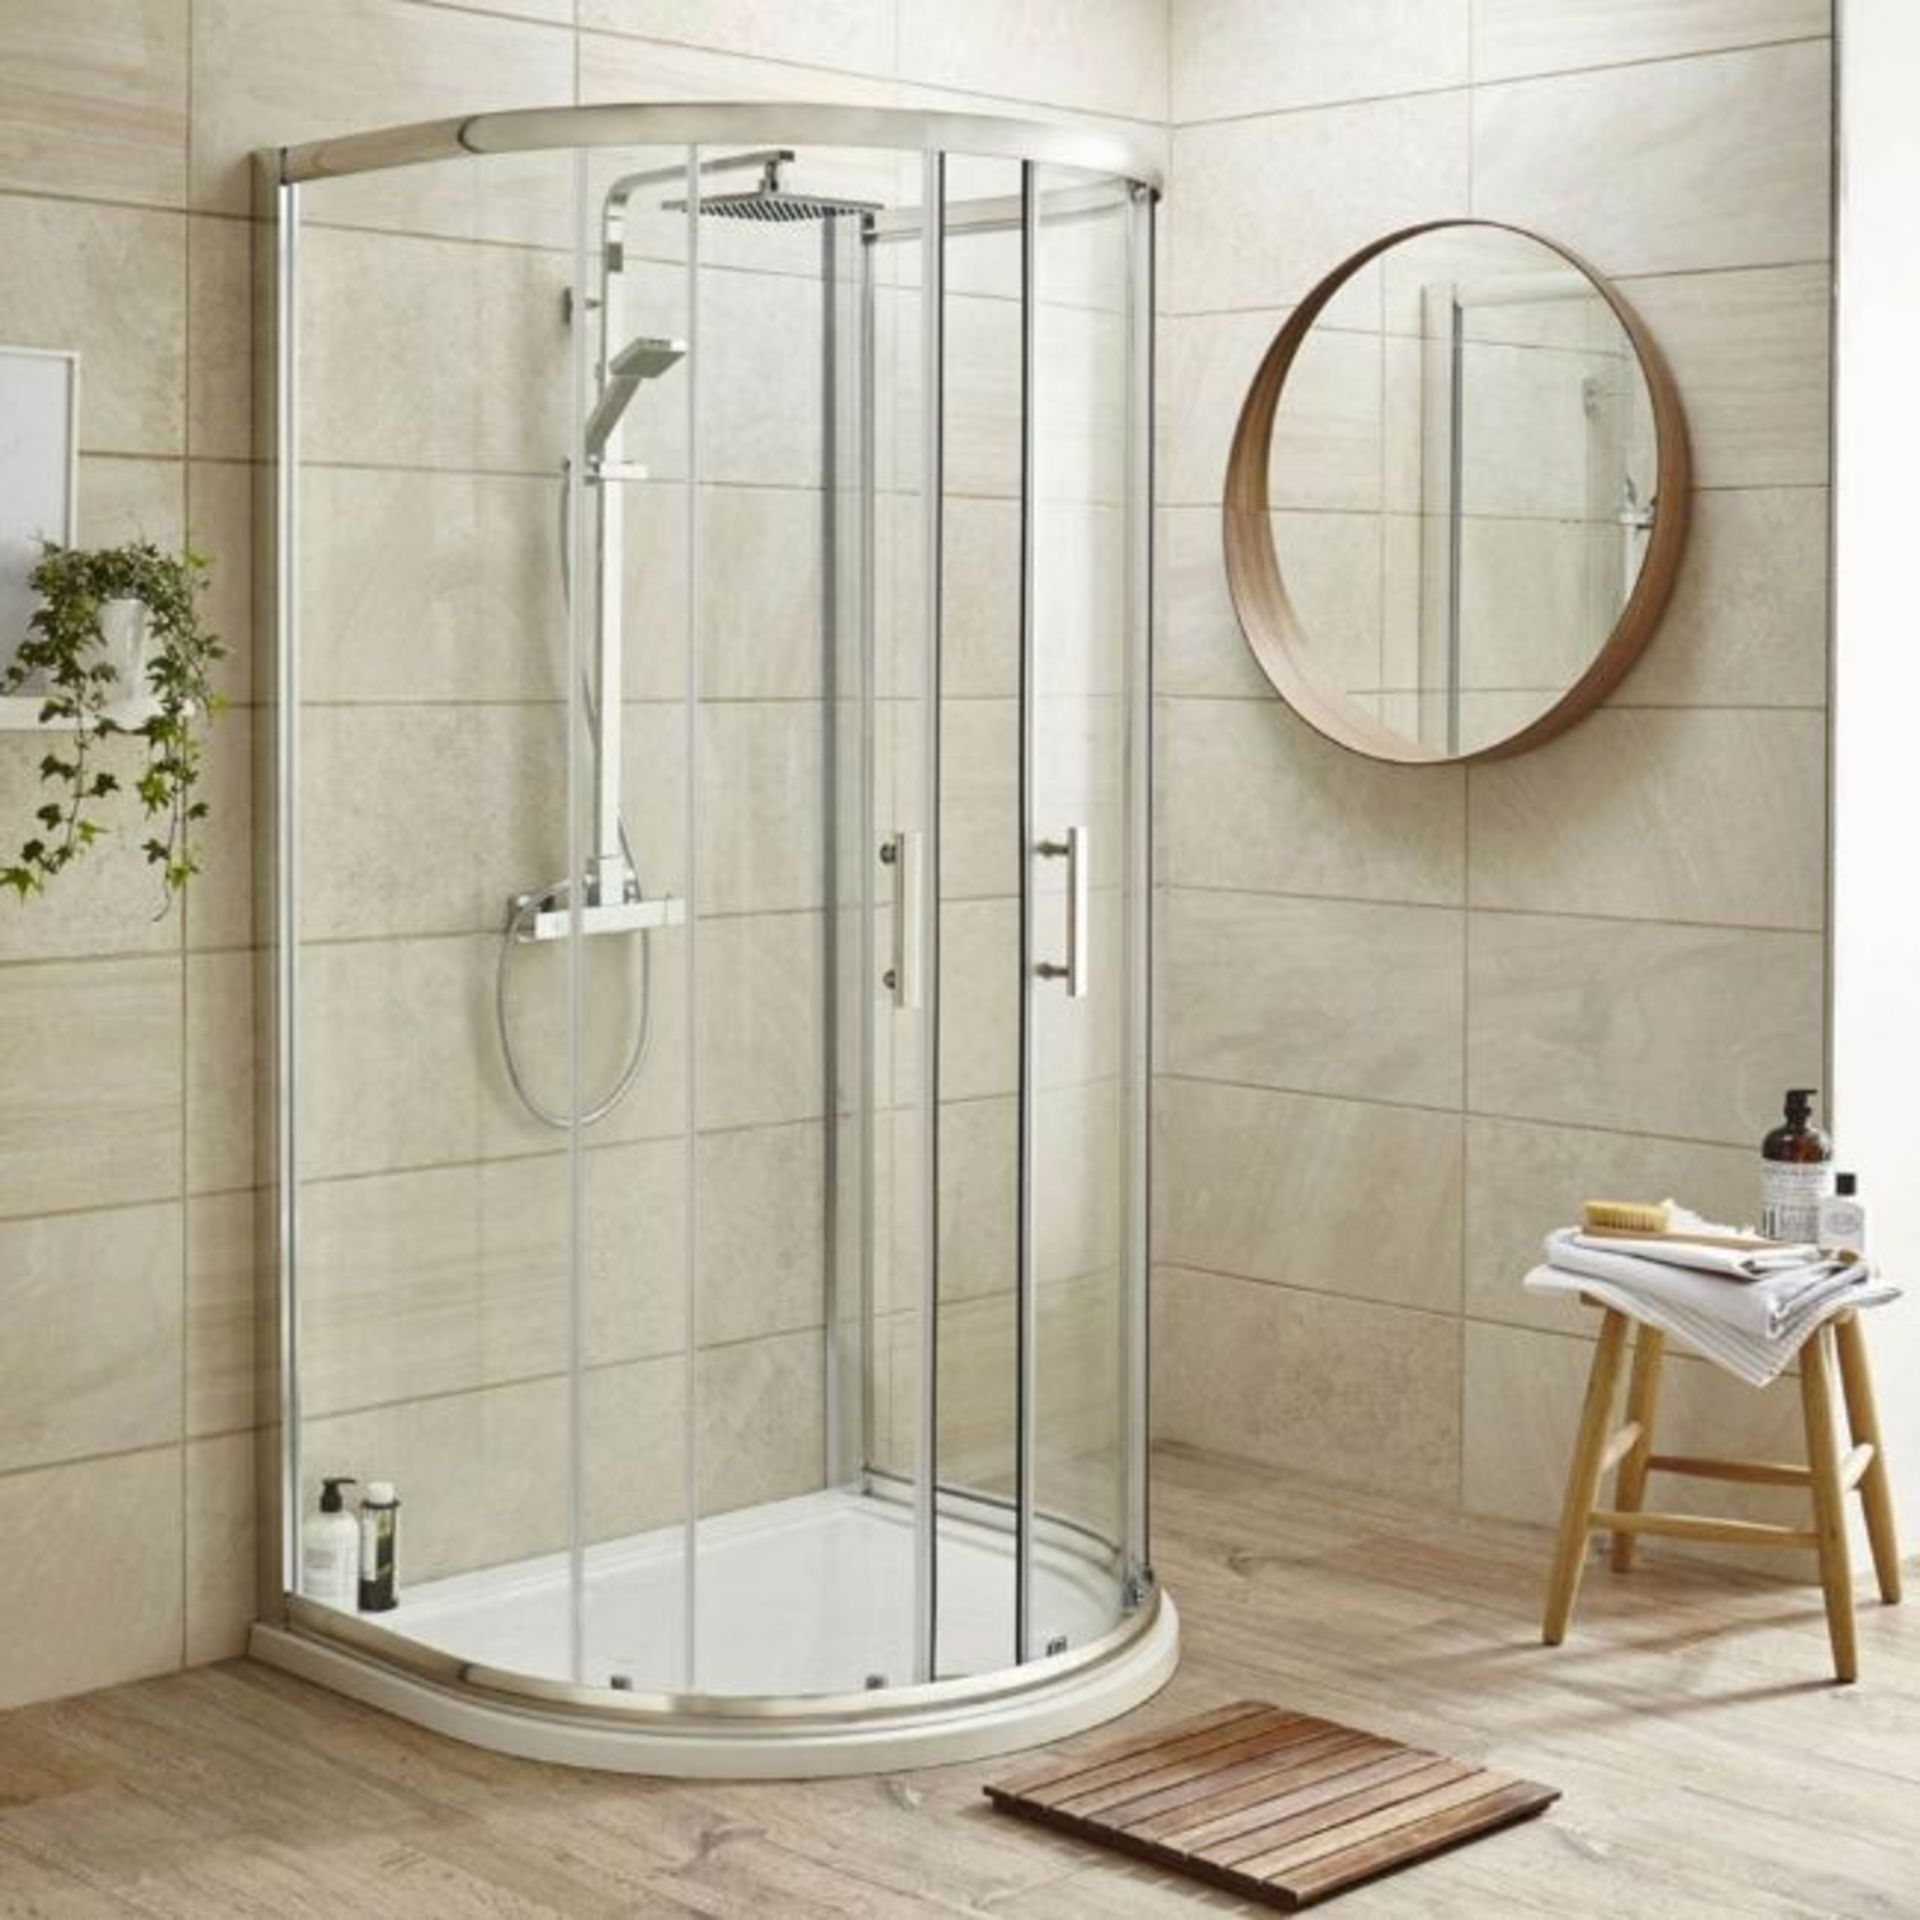 New (Pc129) Twyford's 770 mm Hydro D Shape White Shower Tray. Low Profile Ultra Slim Design Gel - Image 2 of 2